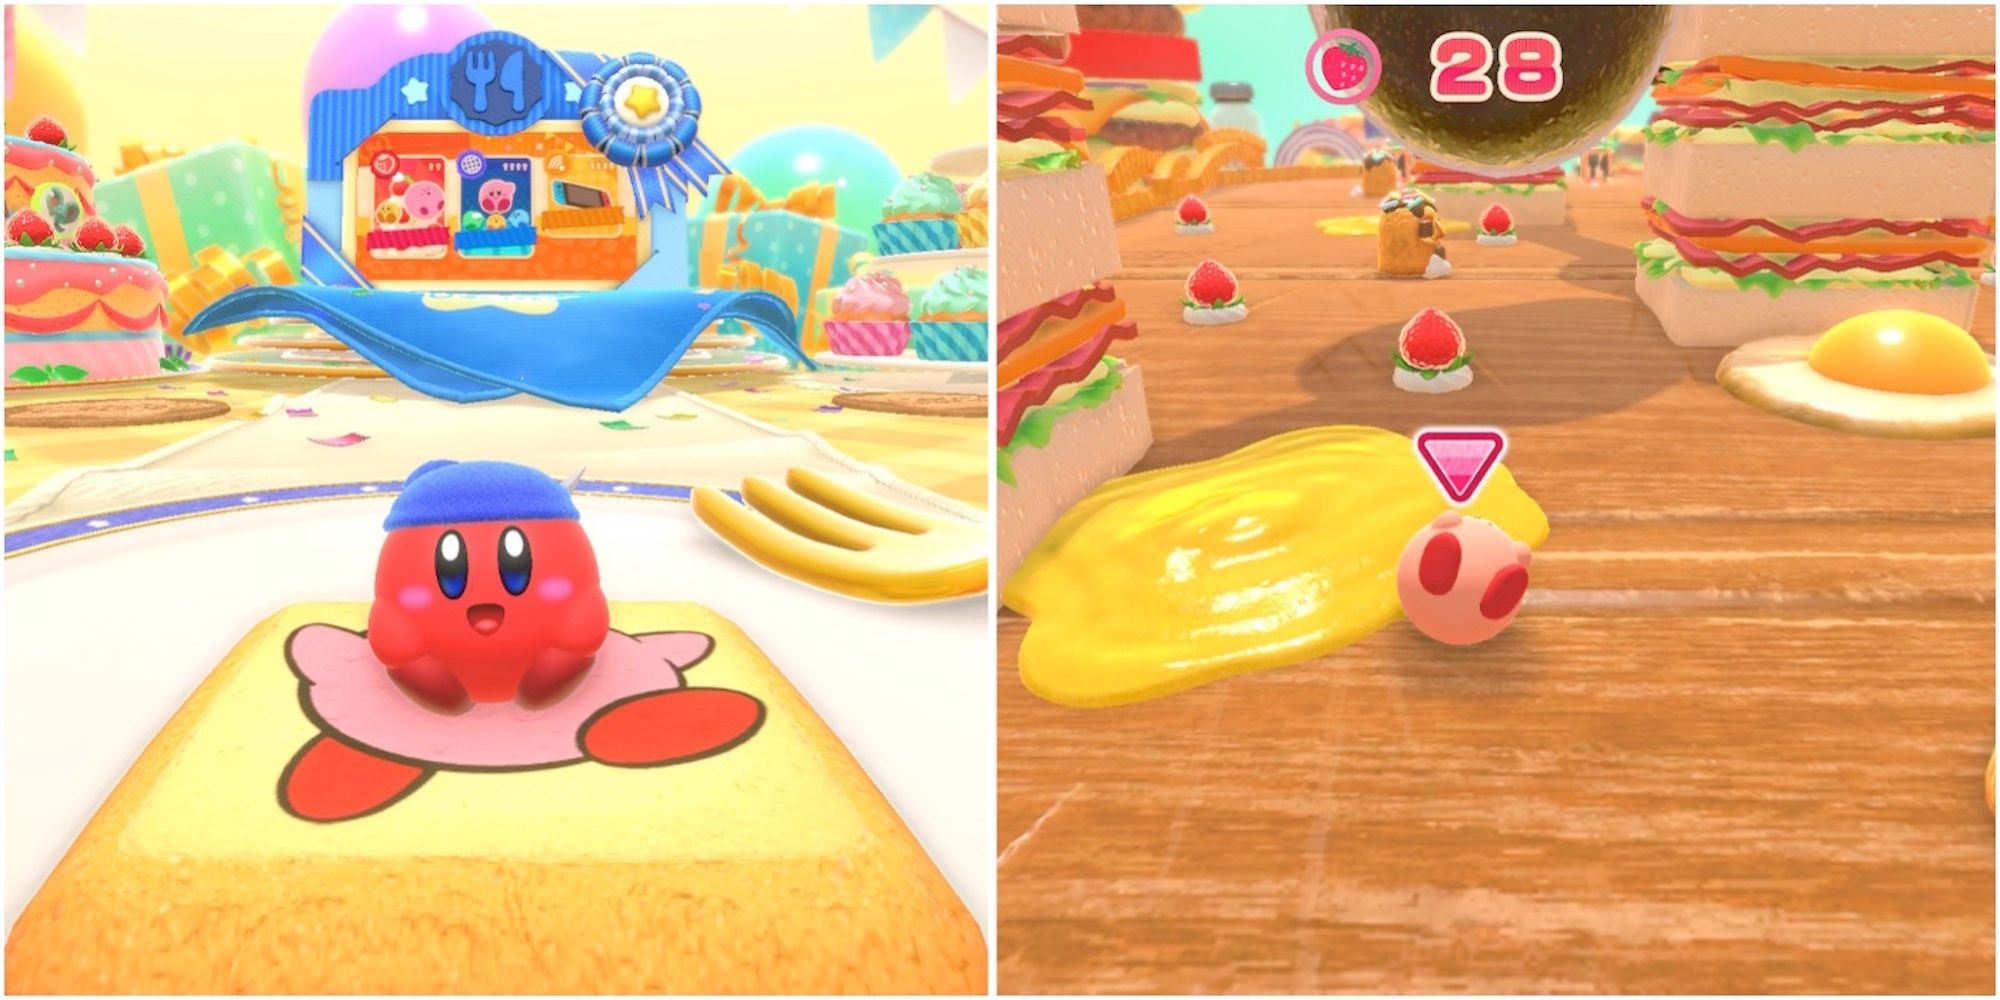 Kirby's Dream Buffet Pros And Cons